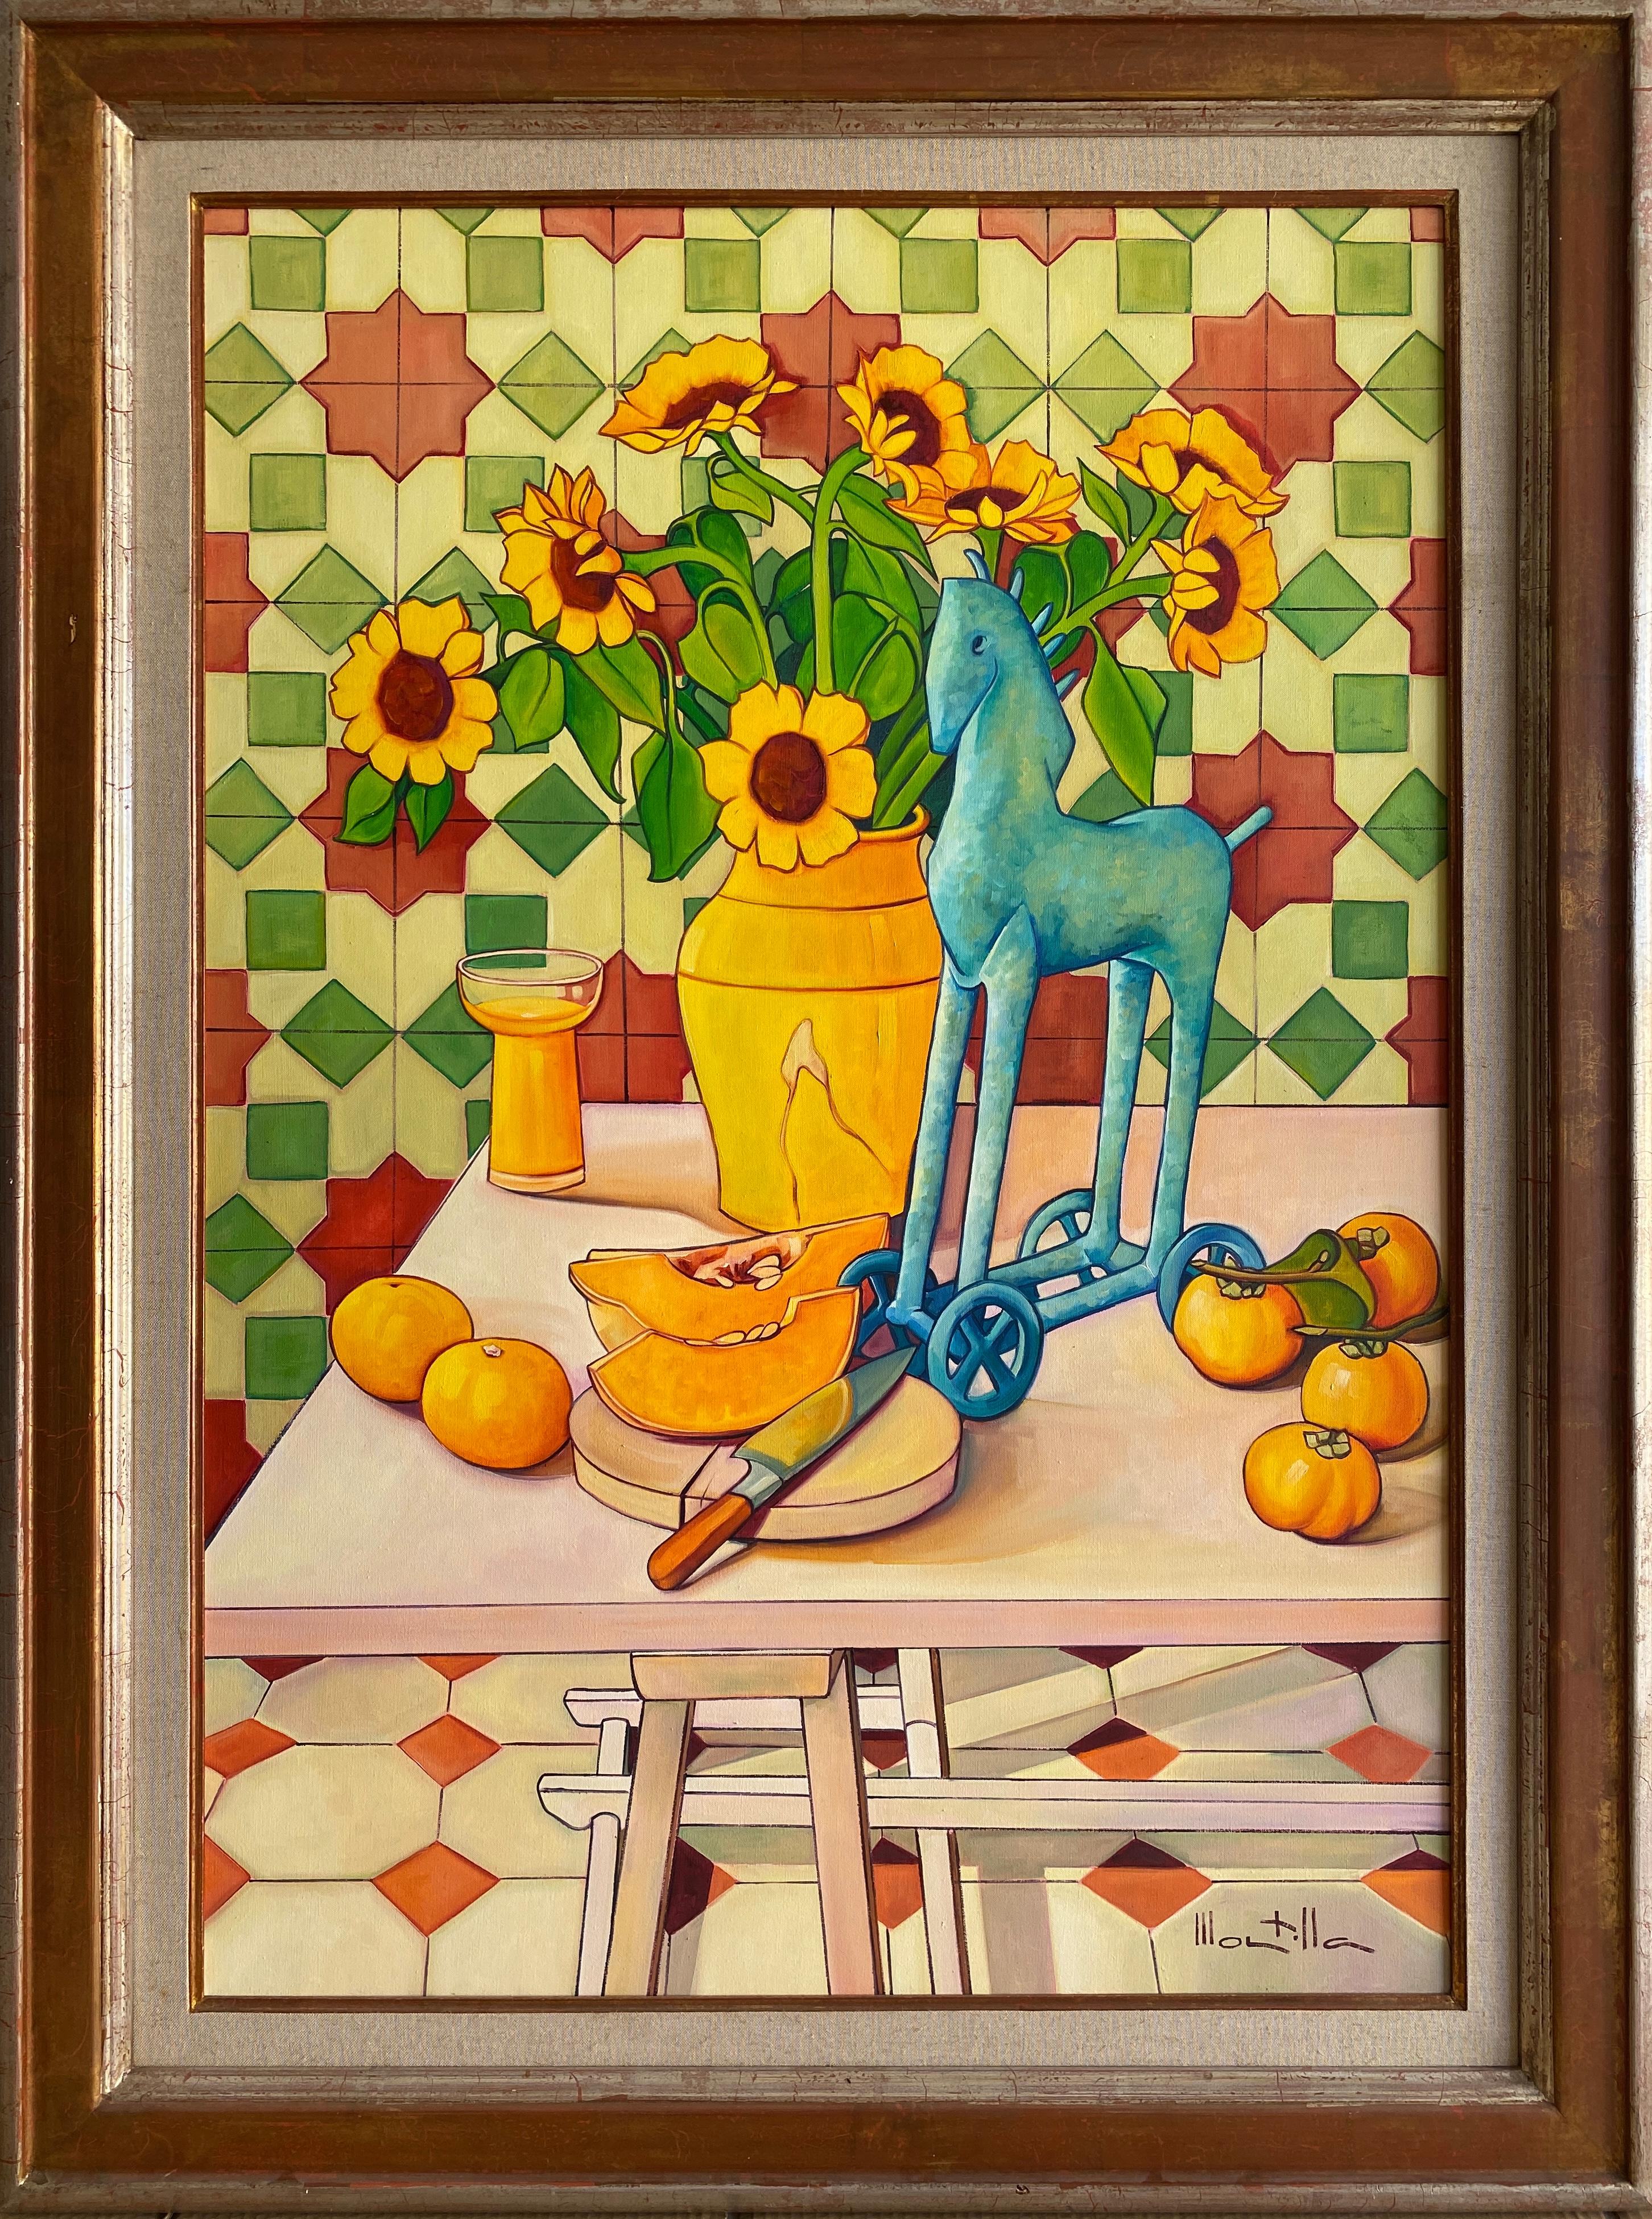 Calabaza (Pumpkin) . Oil on canvas by Spanish artist Chico Montilla.
Measurements: (H) 116x (W) 81  x 2 (D) cm. 
Framed 139 x 104 x 4.5 cm.
Colorful expressionist still-life.
Beautiful artisan style frame.

ABOUT THE ARTIST
Chico Montilla